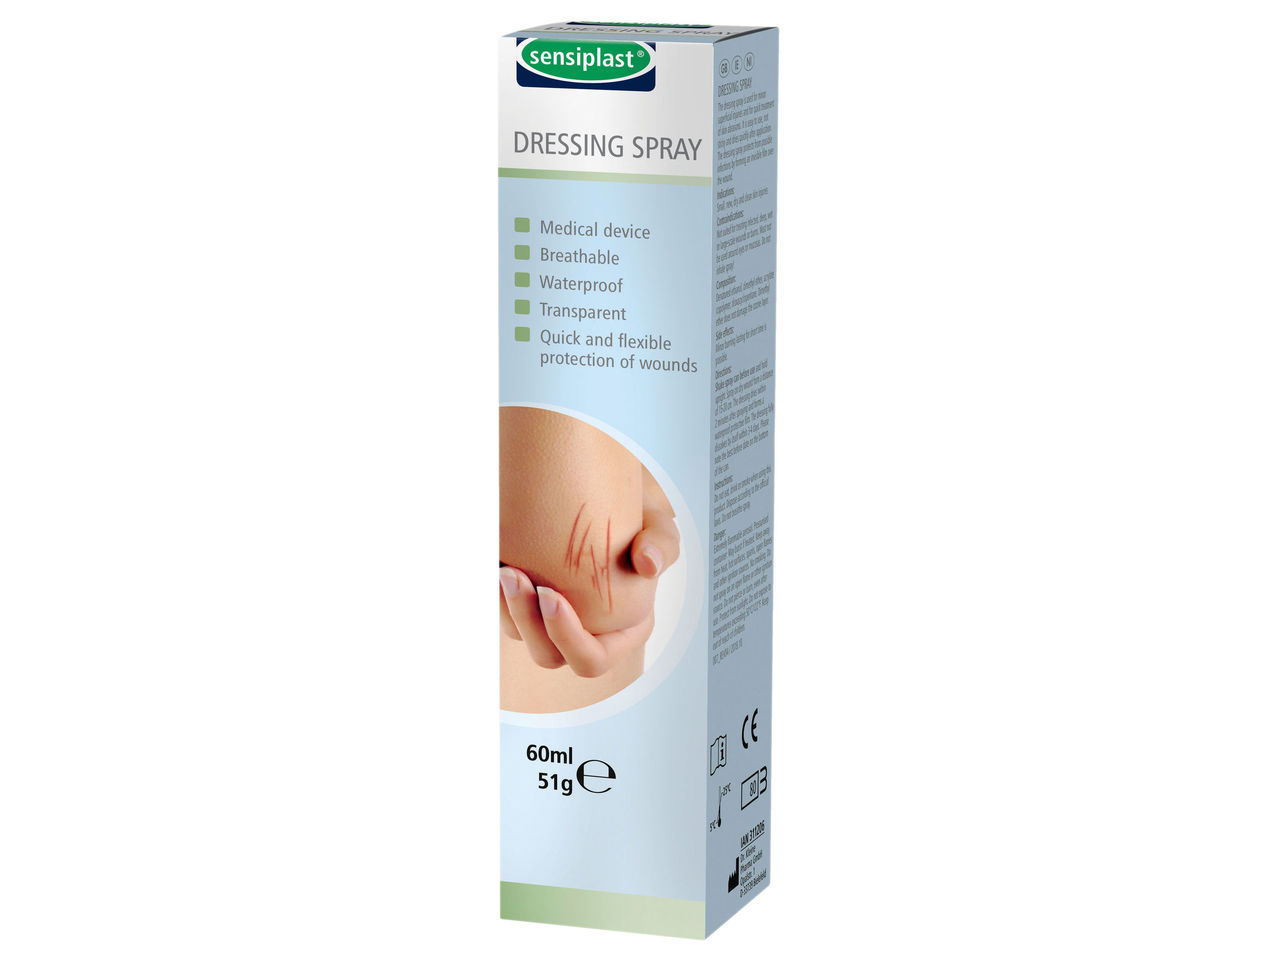 Haemostatic Spray for Wounds / Wounds & Burns Ointment / Dressing Spray